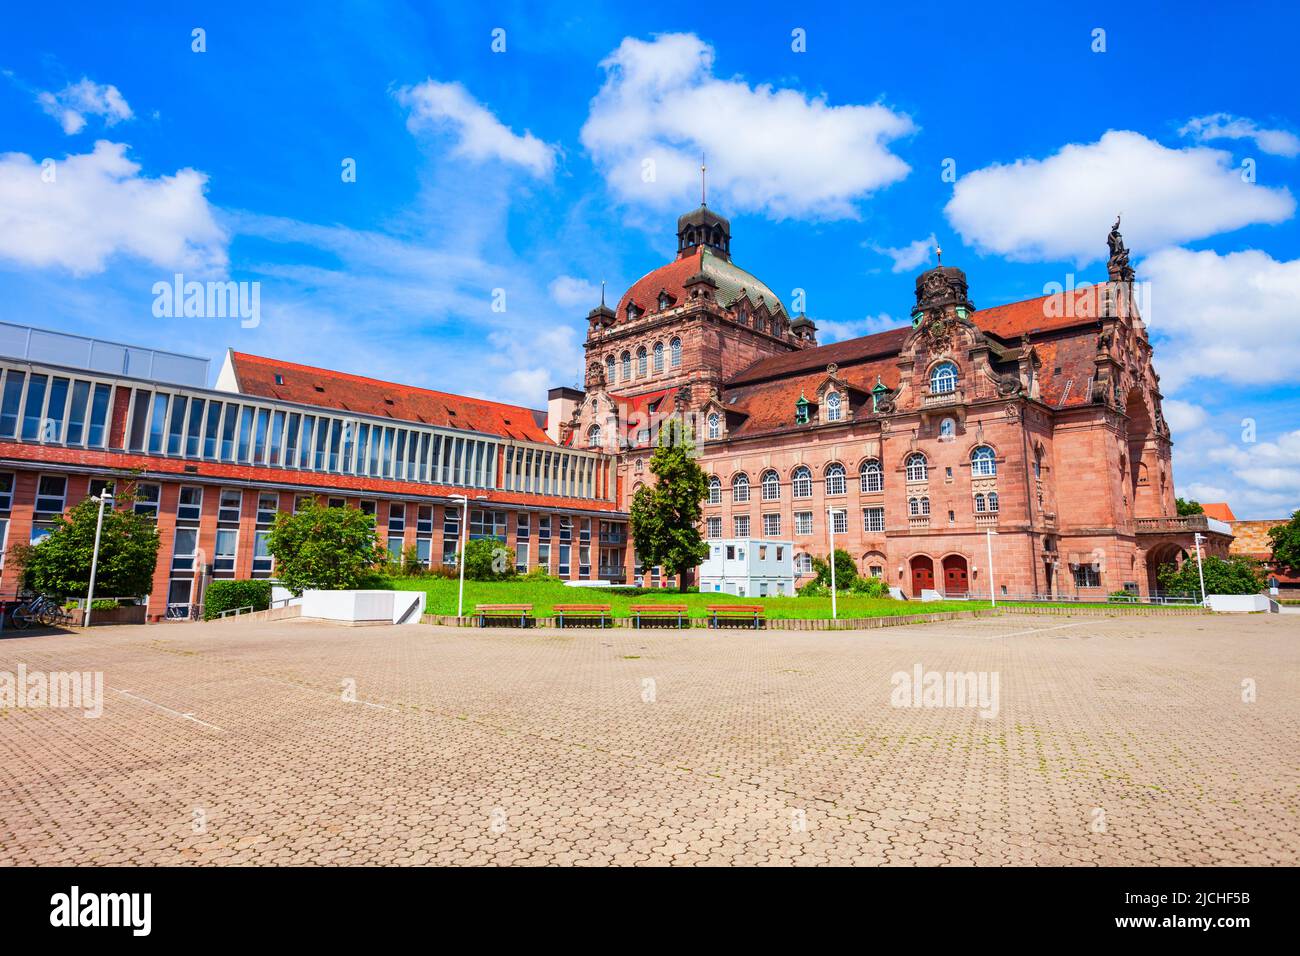 Nuremberg Theatre or Opera House or Staatstheater. Nuremberg is the second largest city of Bavaria state in Germany. Stock Photo